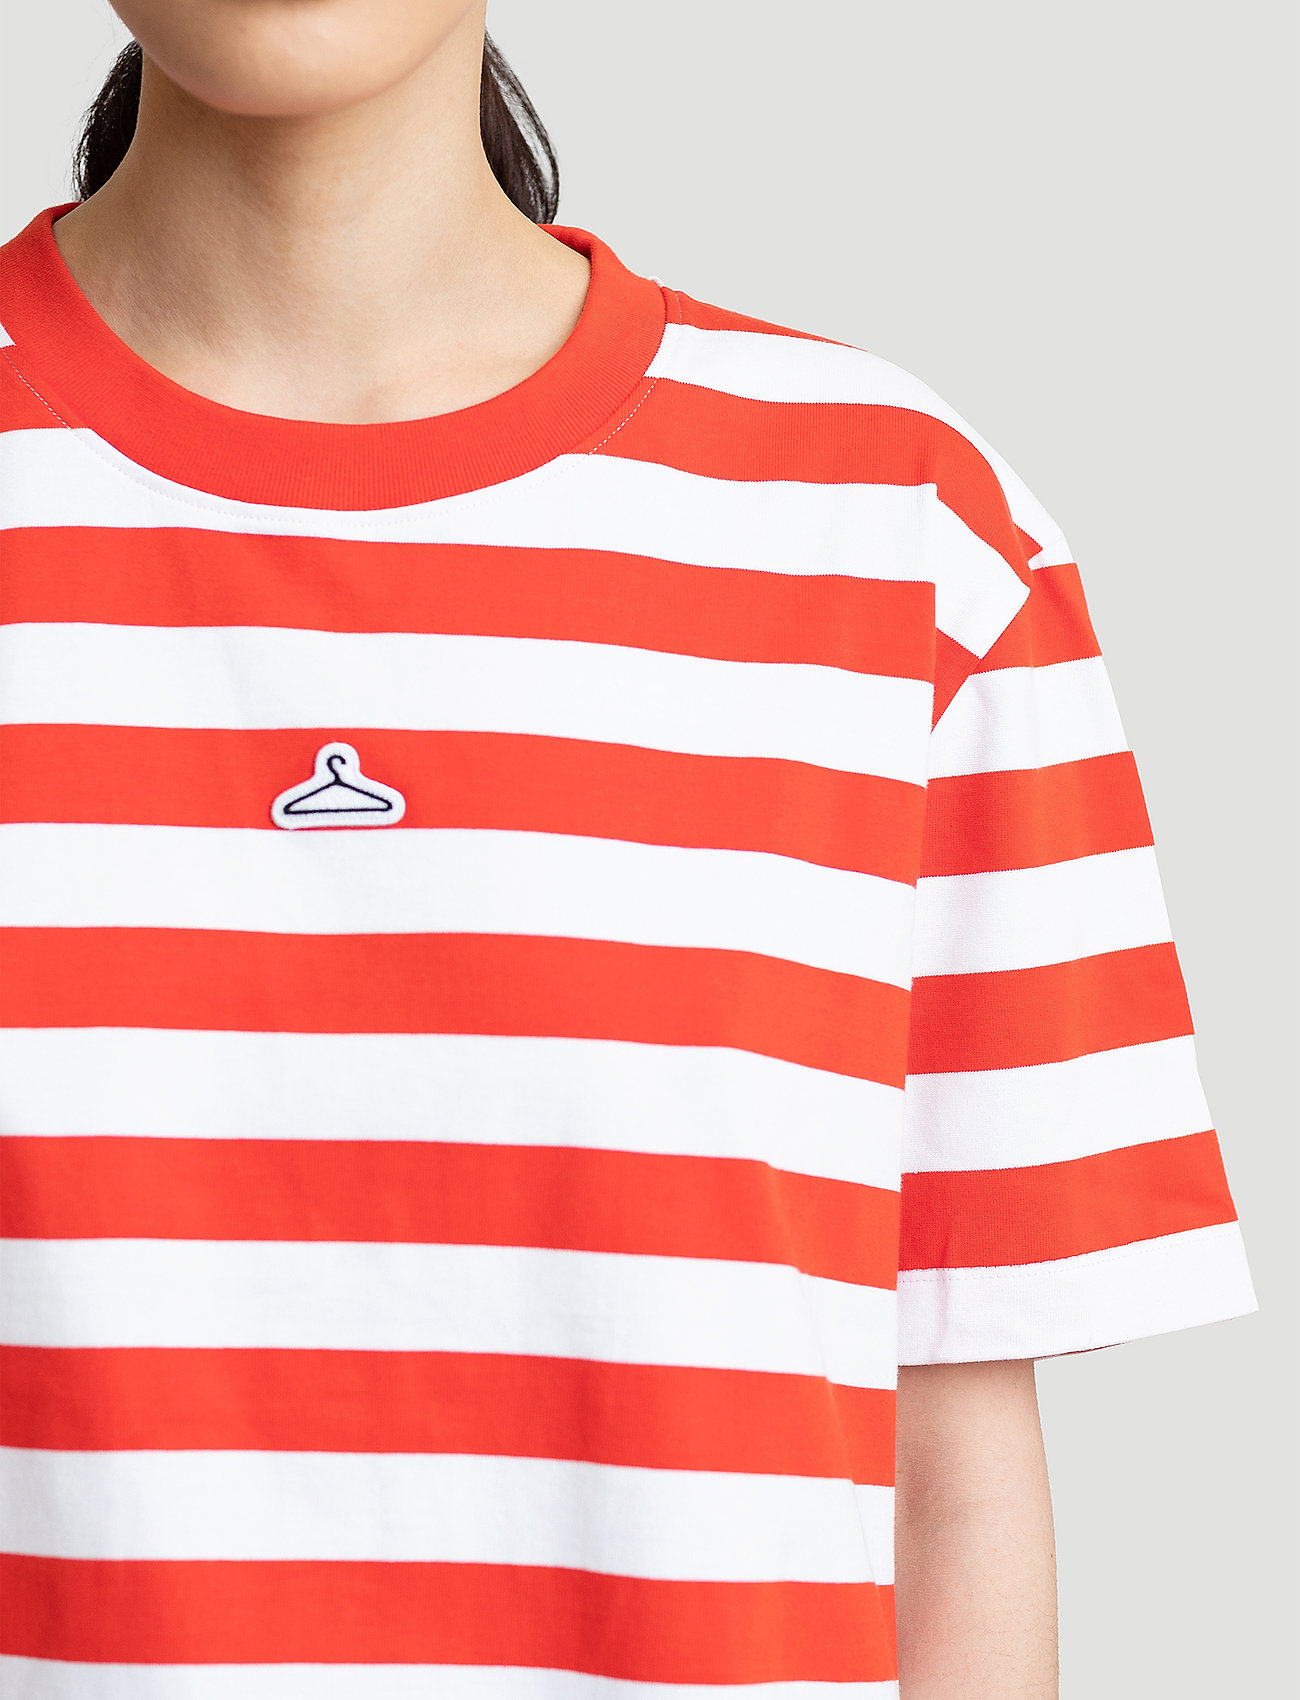 Hanger by Holzweiler - Hanger Striped Tee - t-shirts - red white 1664 - 3